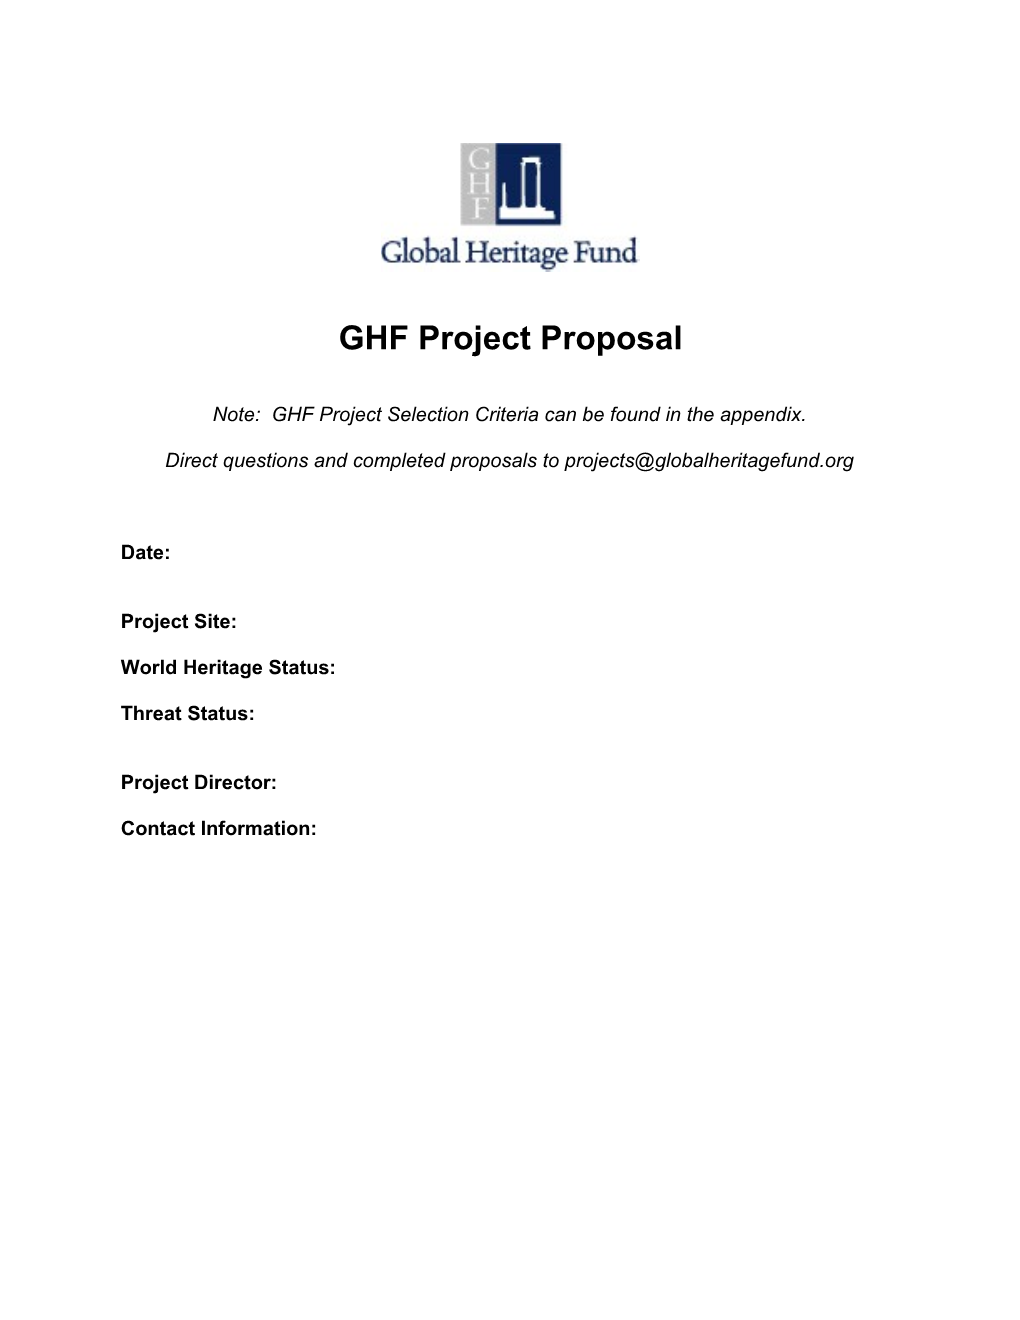 GHF Project Proposal